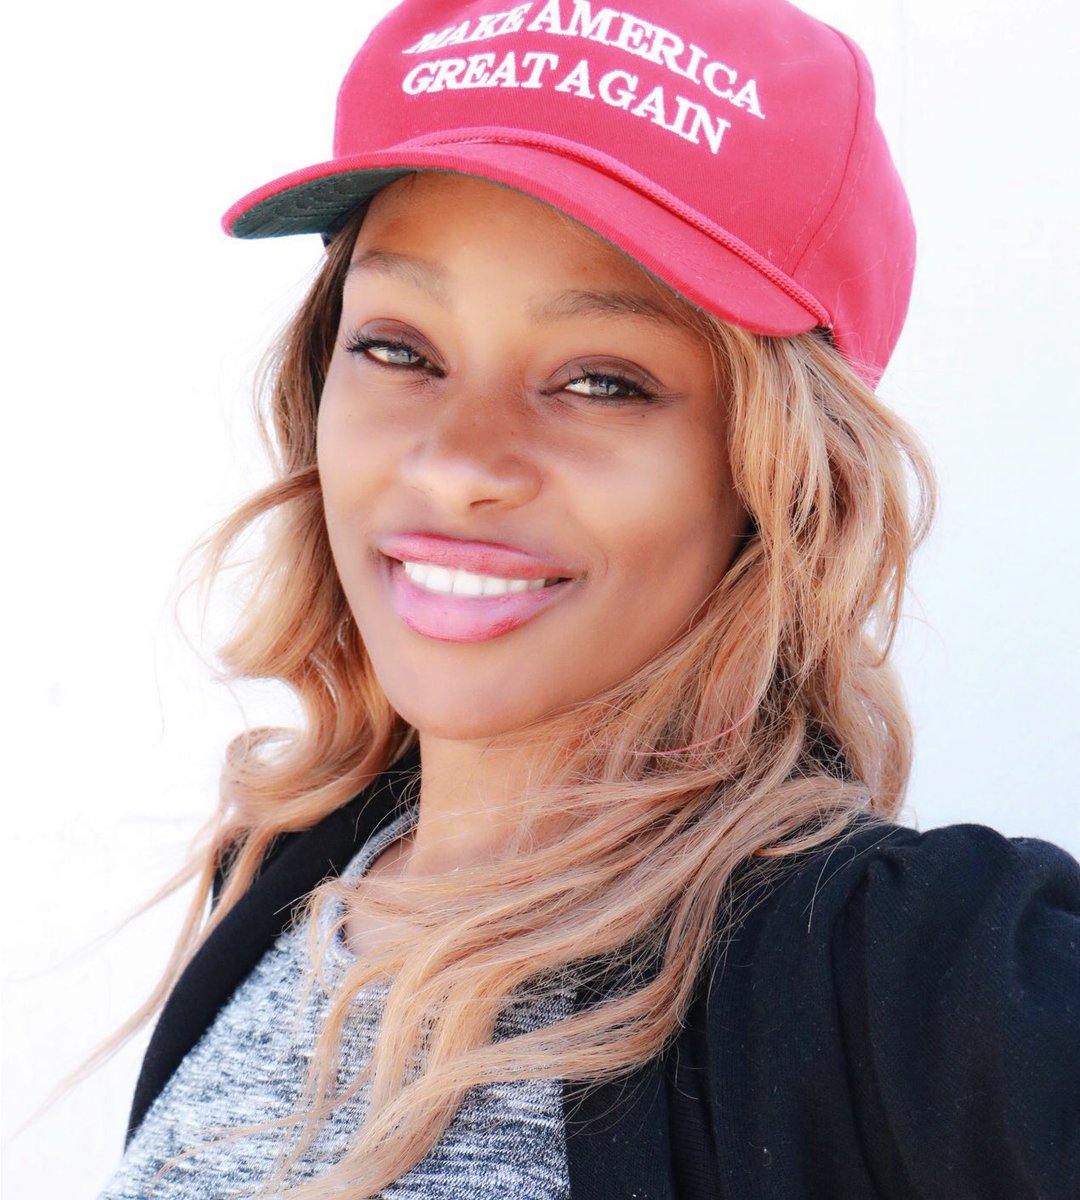 Black Lady For Trump: Image twitter